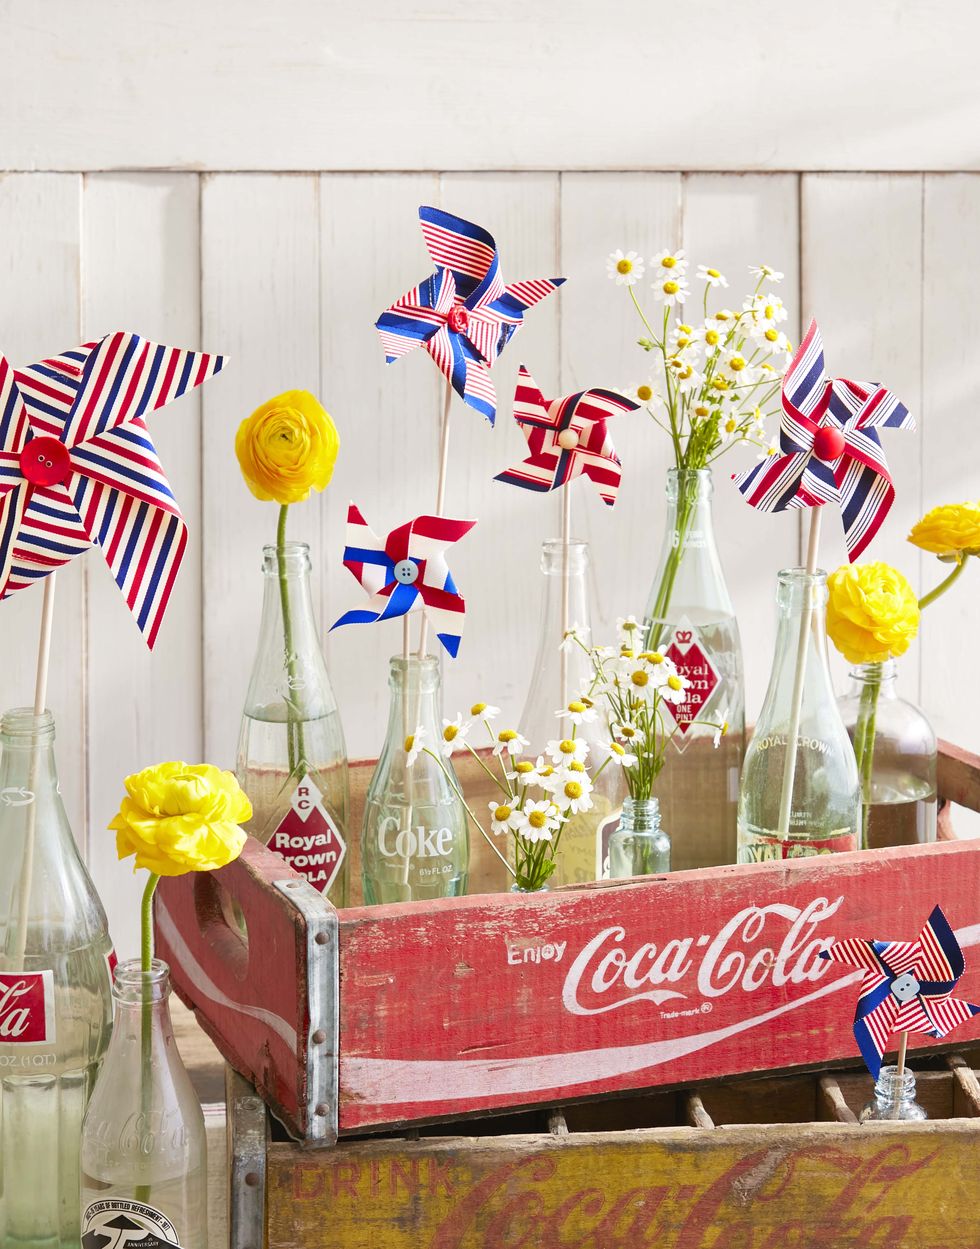 pinwheels made from red white and blue ribbons with button centers attached to skewers